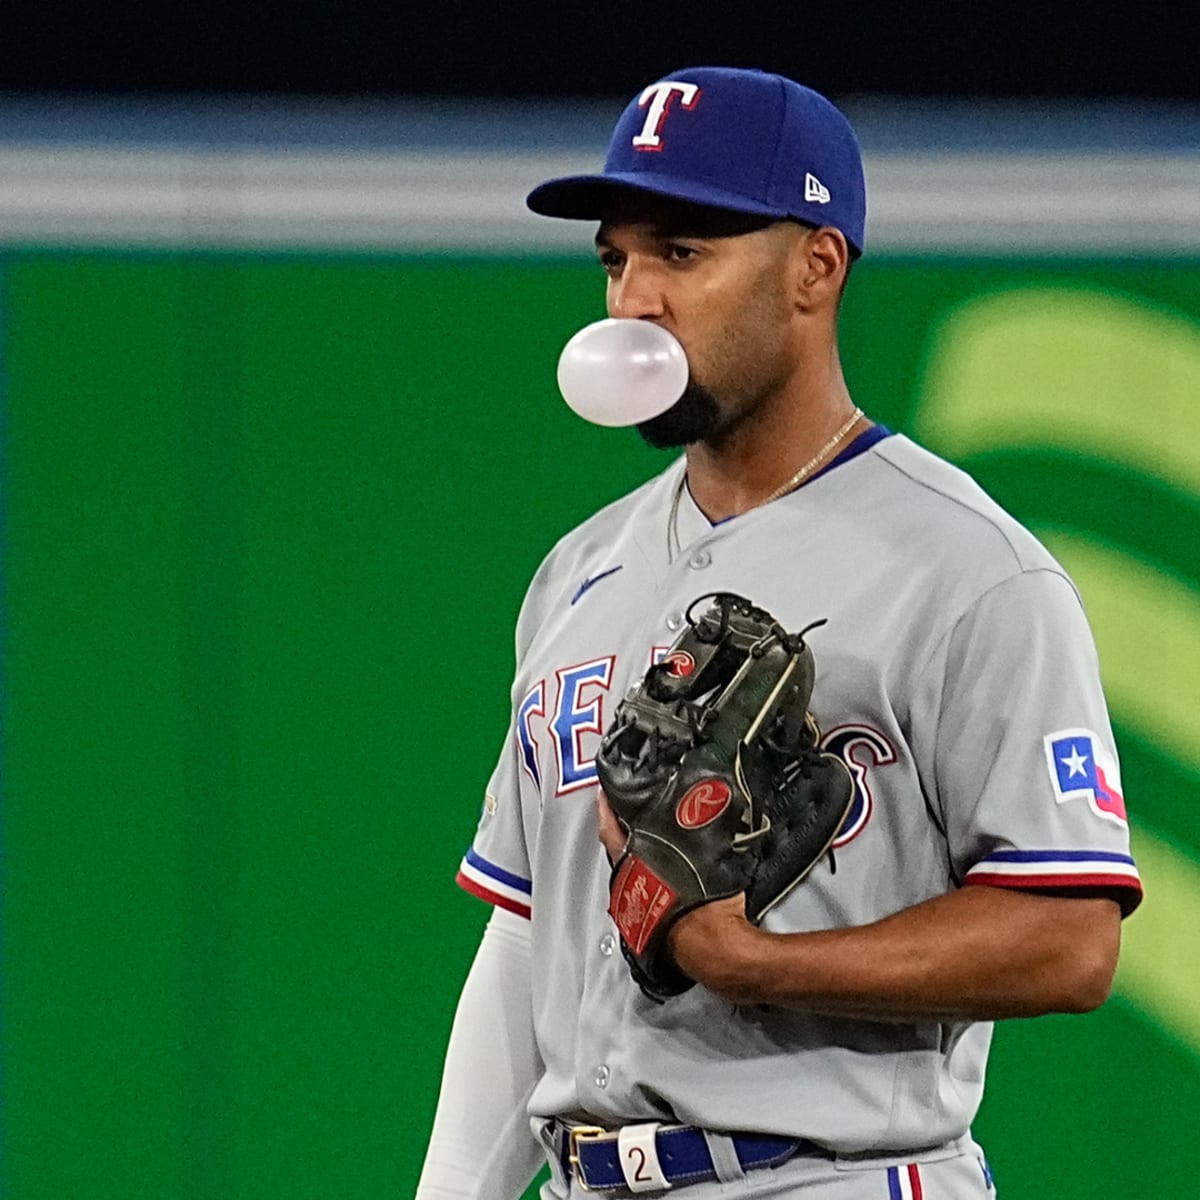 Rangers in rebuilding mode decade after only 2 World Series